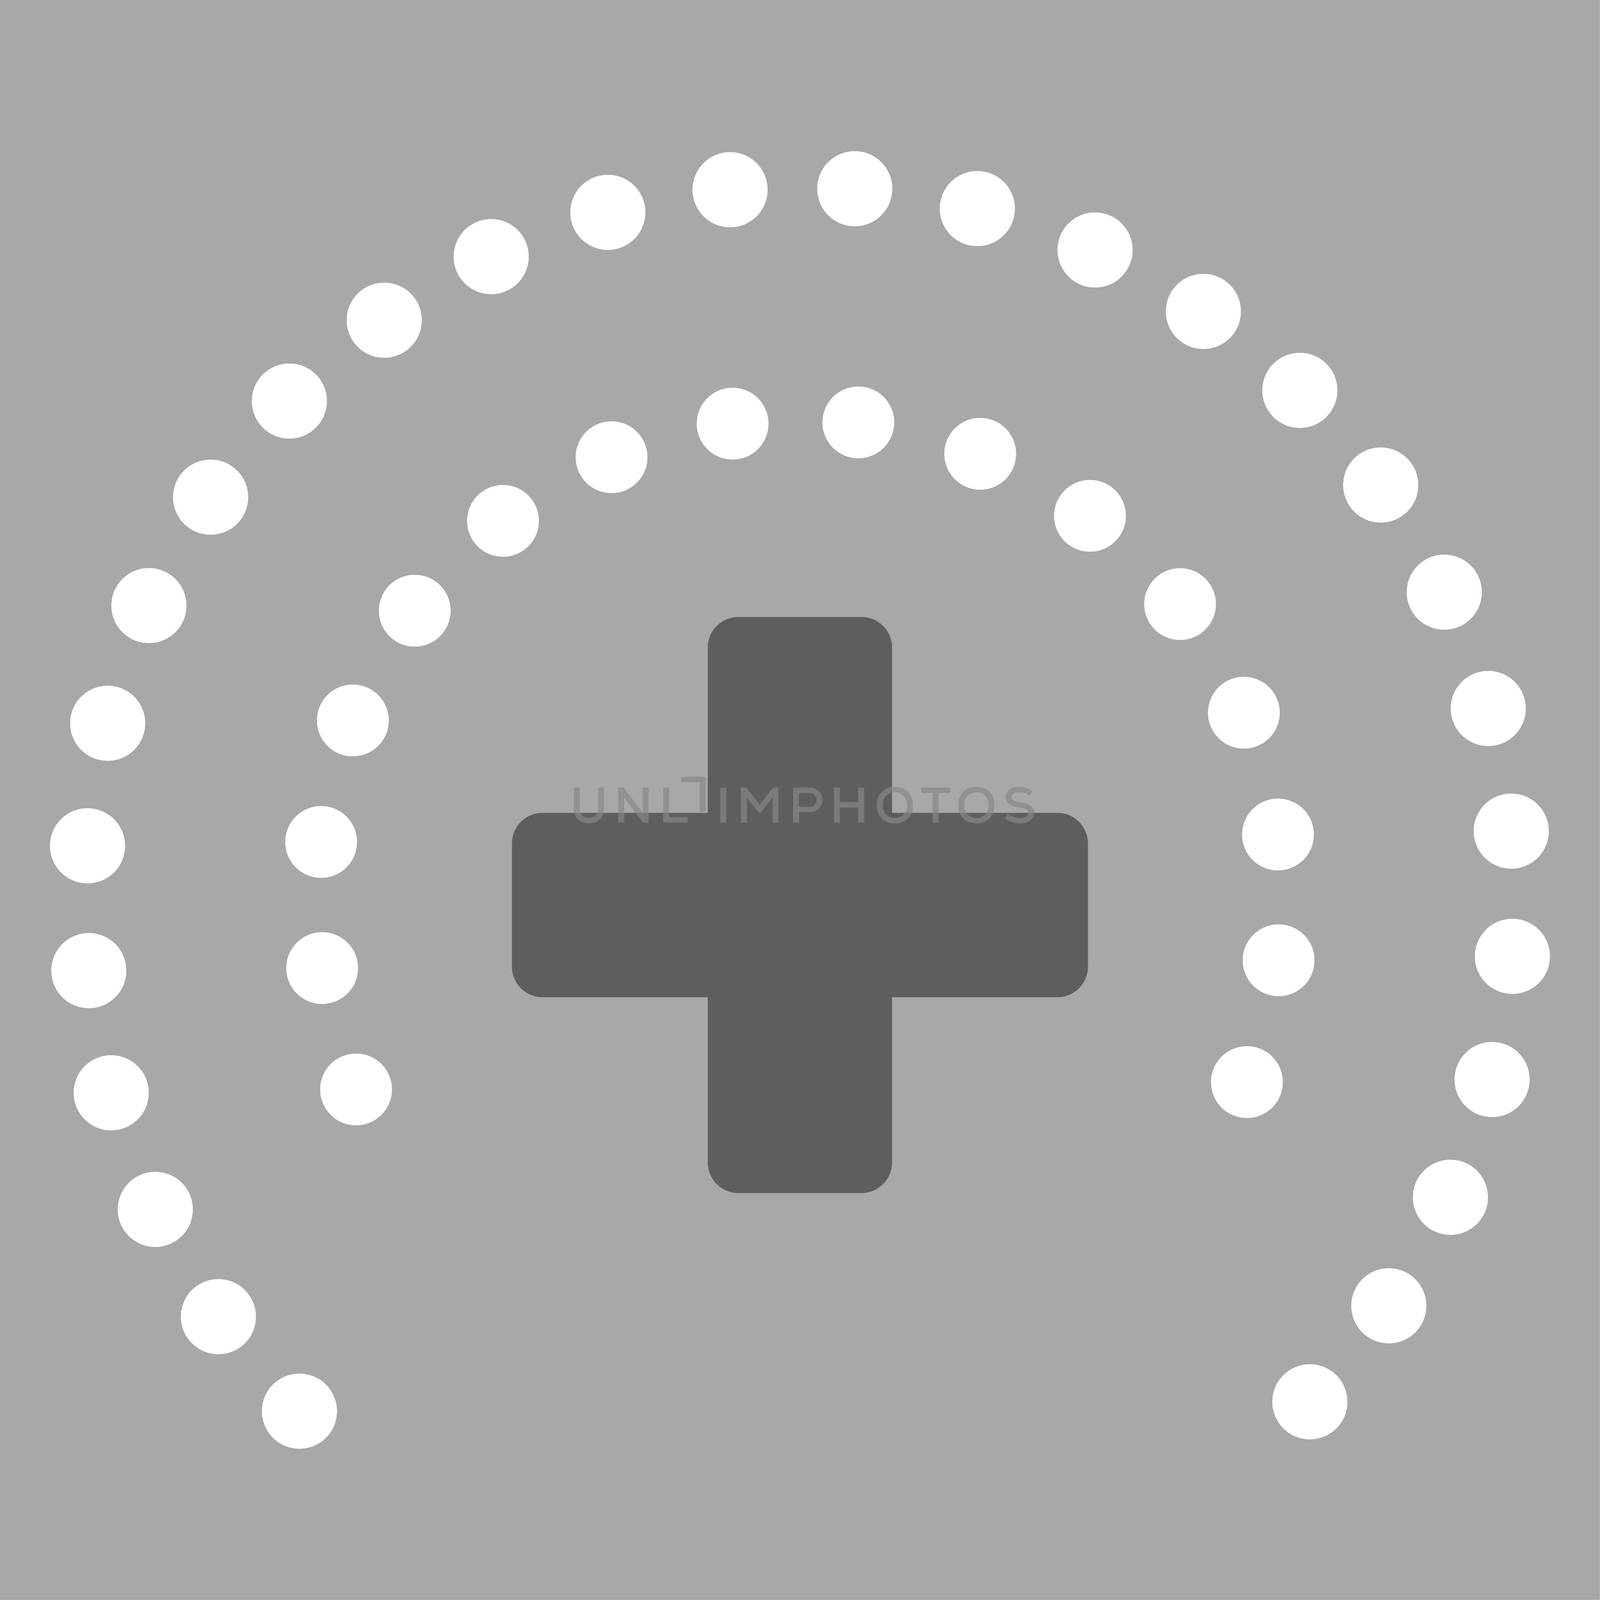 Health Care Protection raster icon. Style is bicolor flat symbol, dark gray and white colors, rounded angles, silver background.